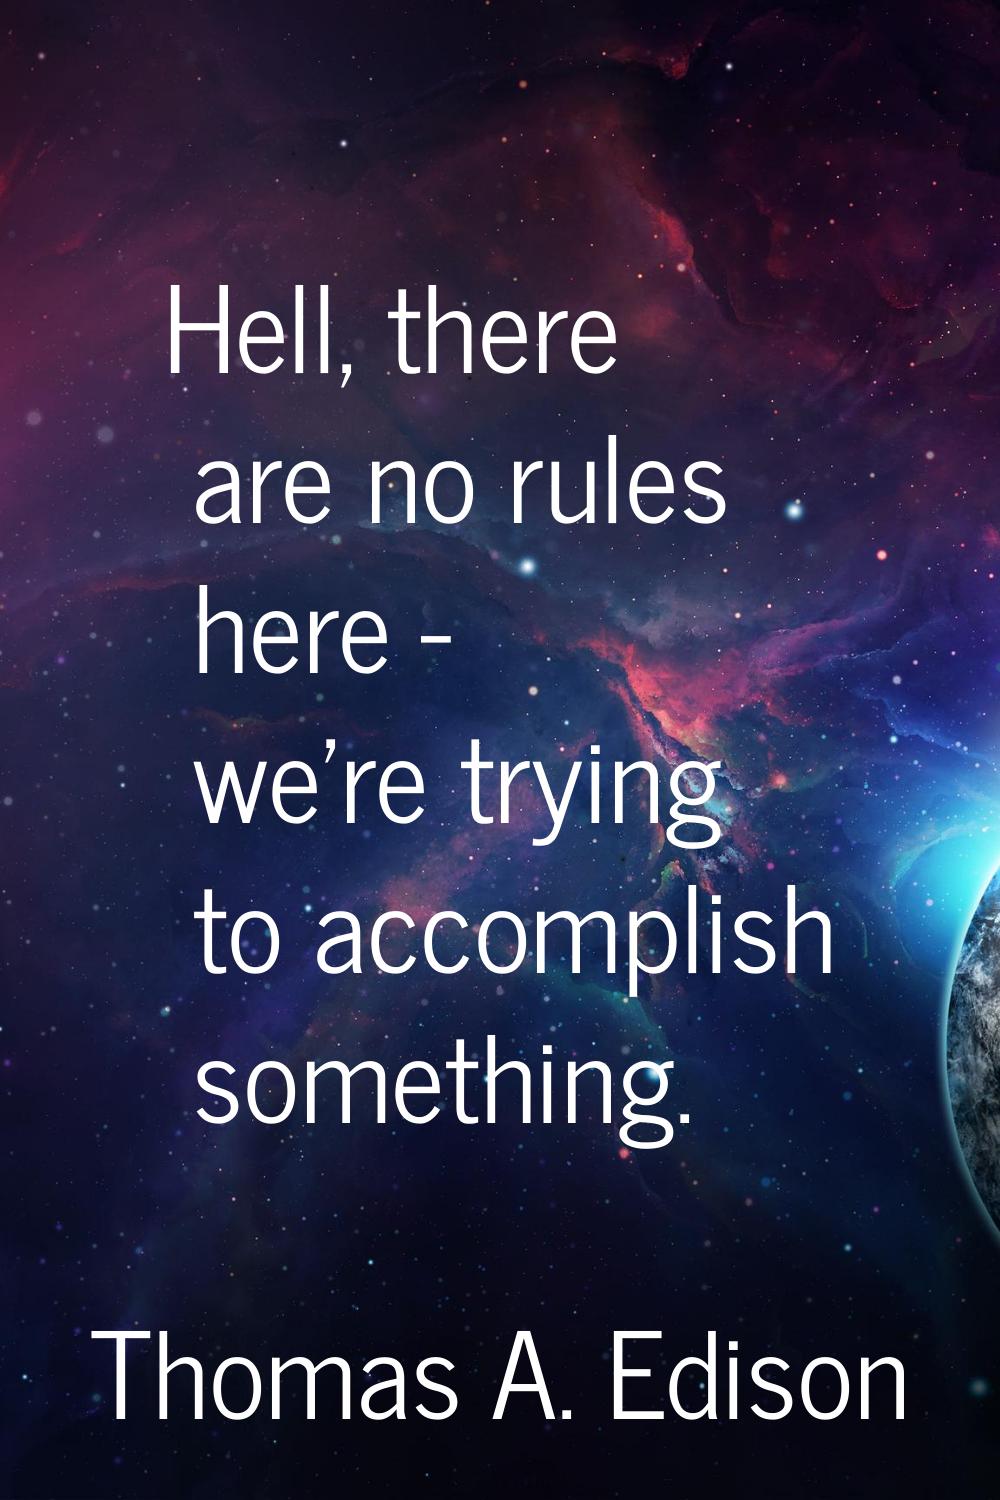 Hell, there are no rules here - we're trying to accomplish something.